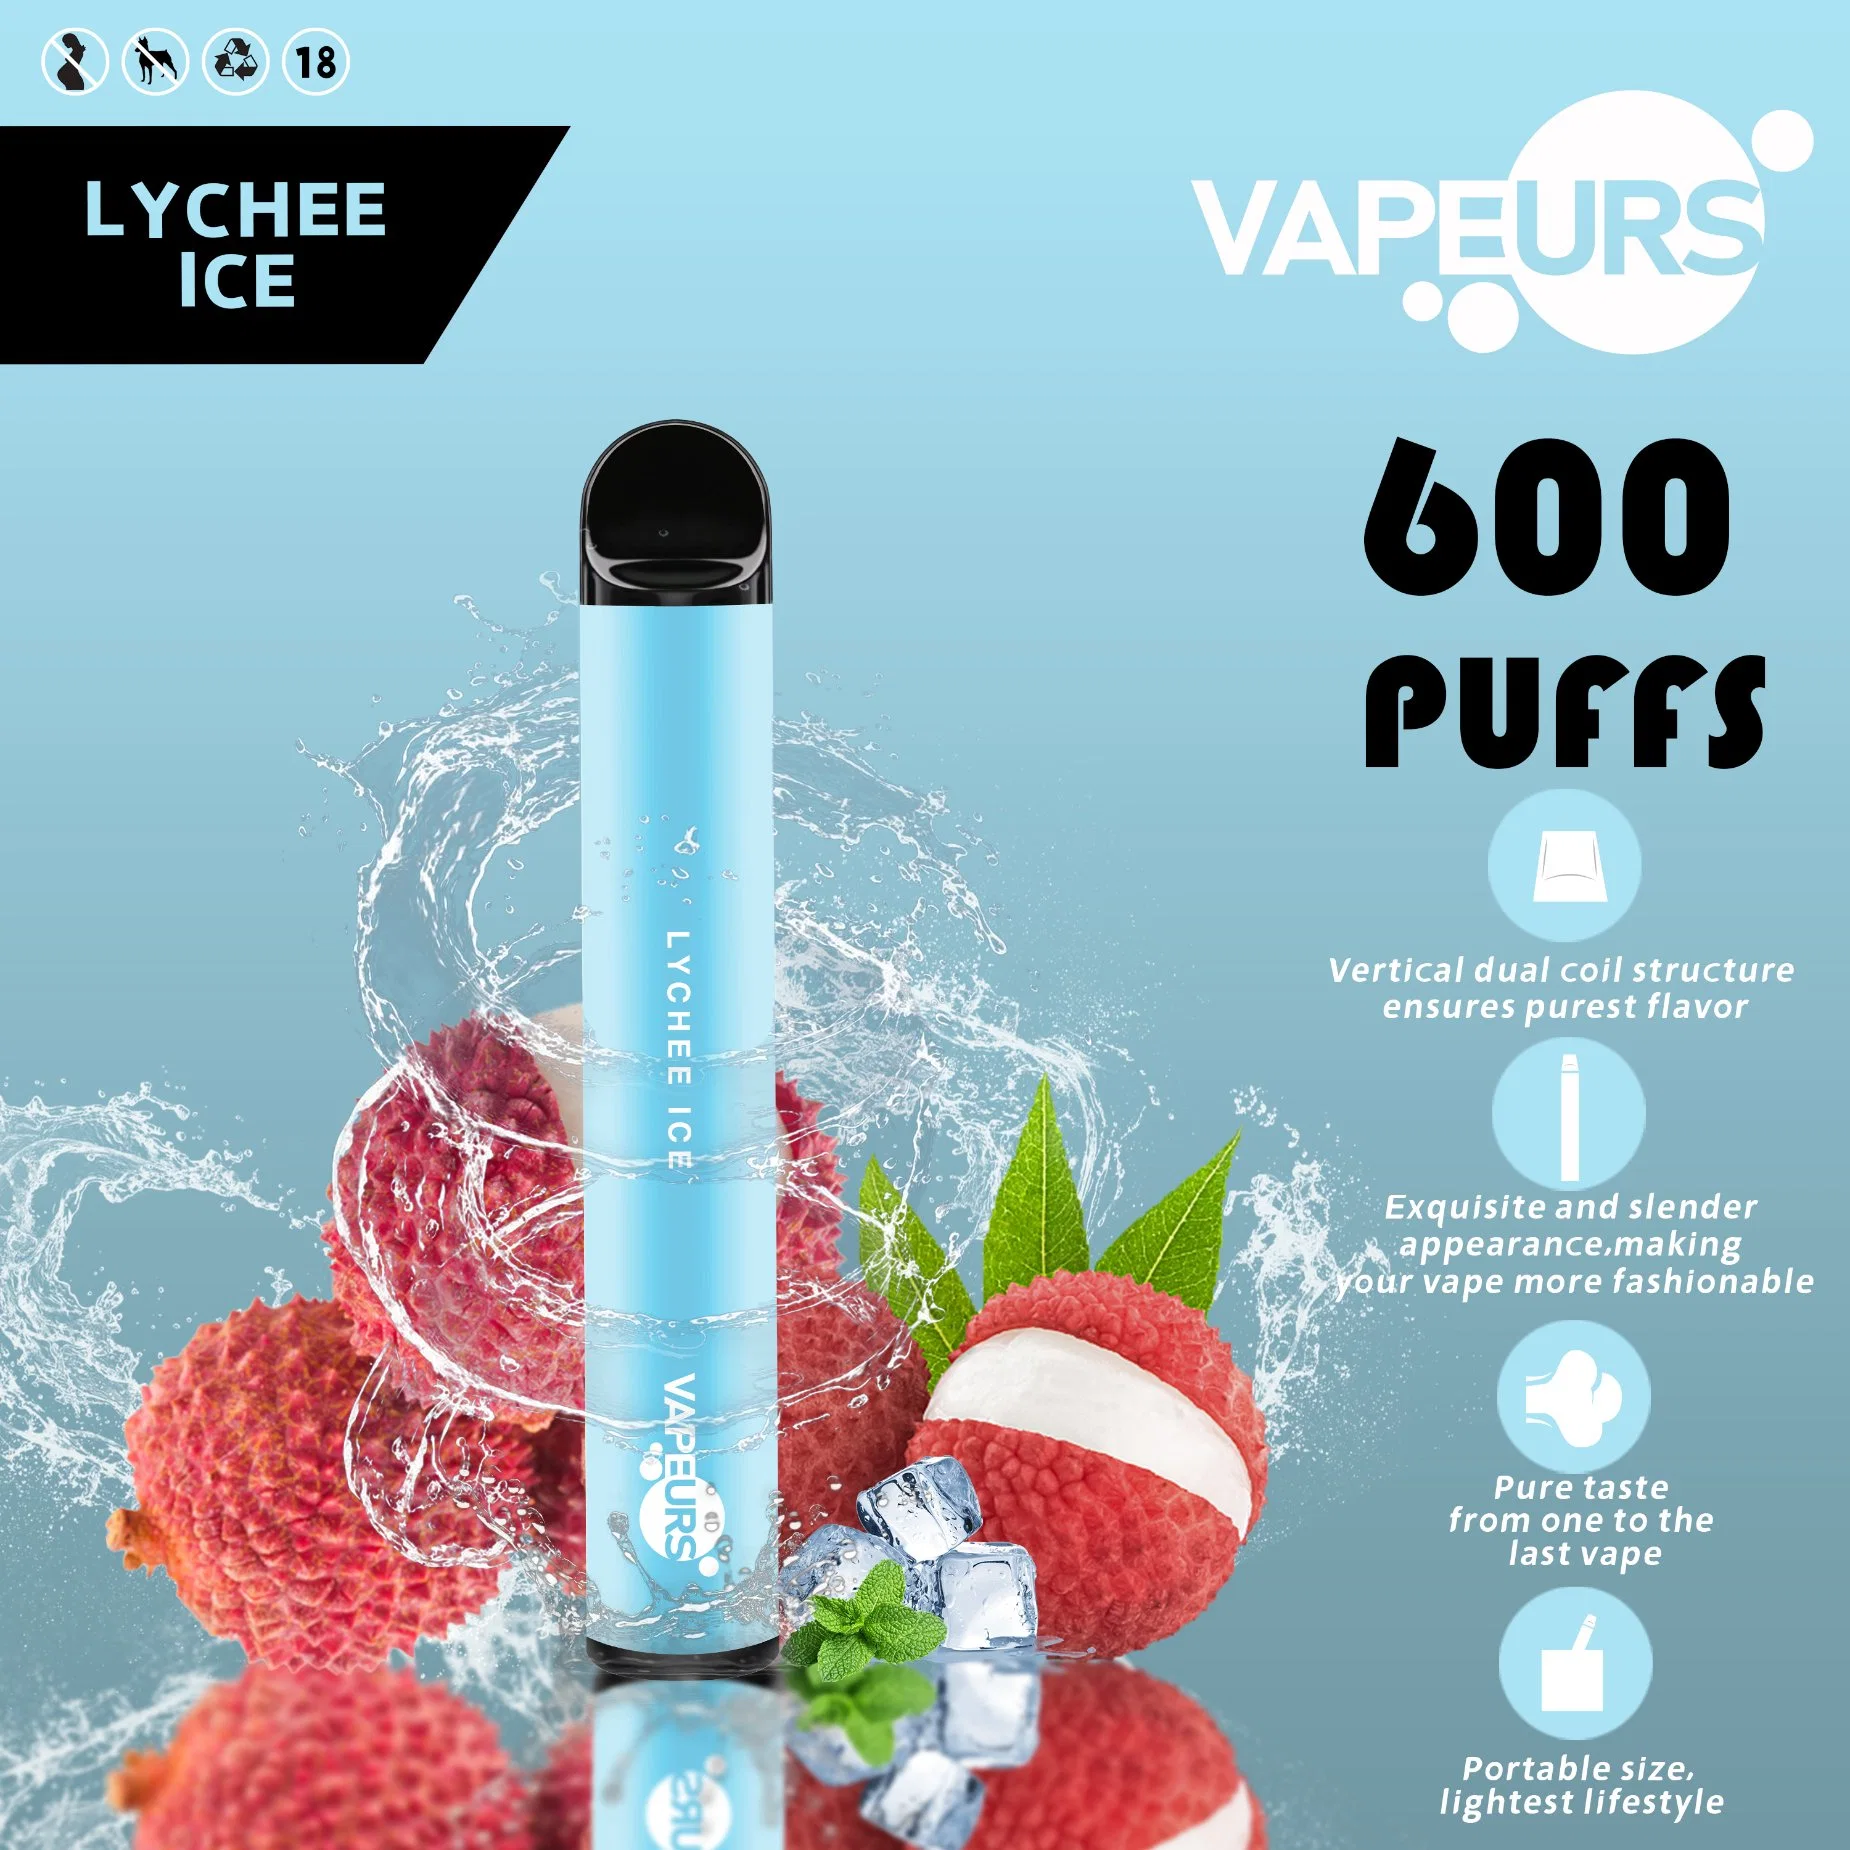 up to 600 Puffs Passion Fruit Flavor Vapes 0-5% Nicotine Strength E Cigarette Multi Languages Packaging Disposable/Chargeable Vape High quality/High cost performance Hookah